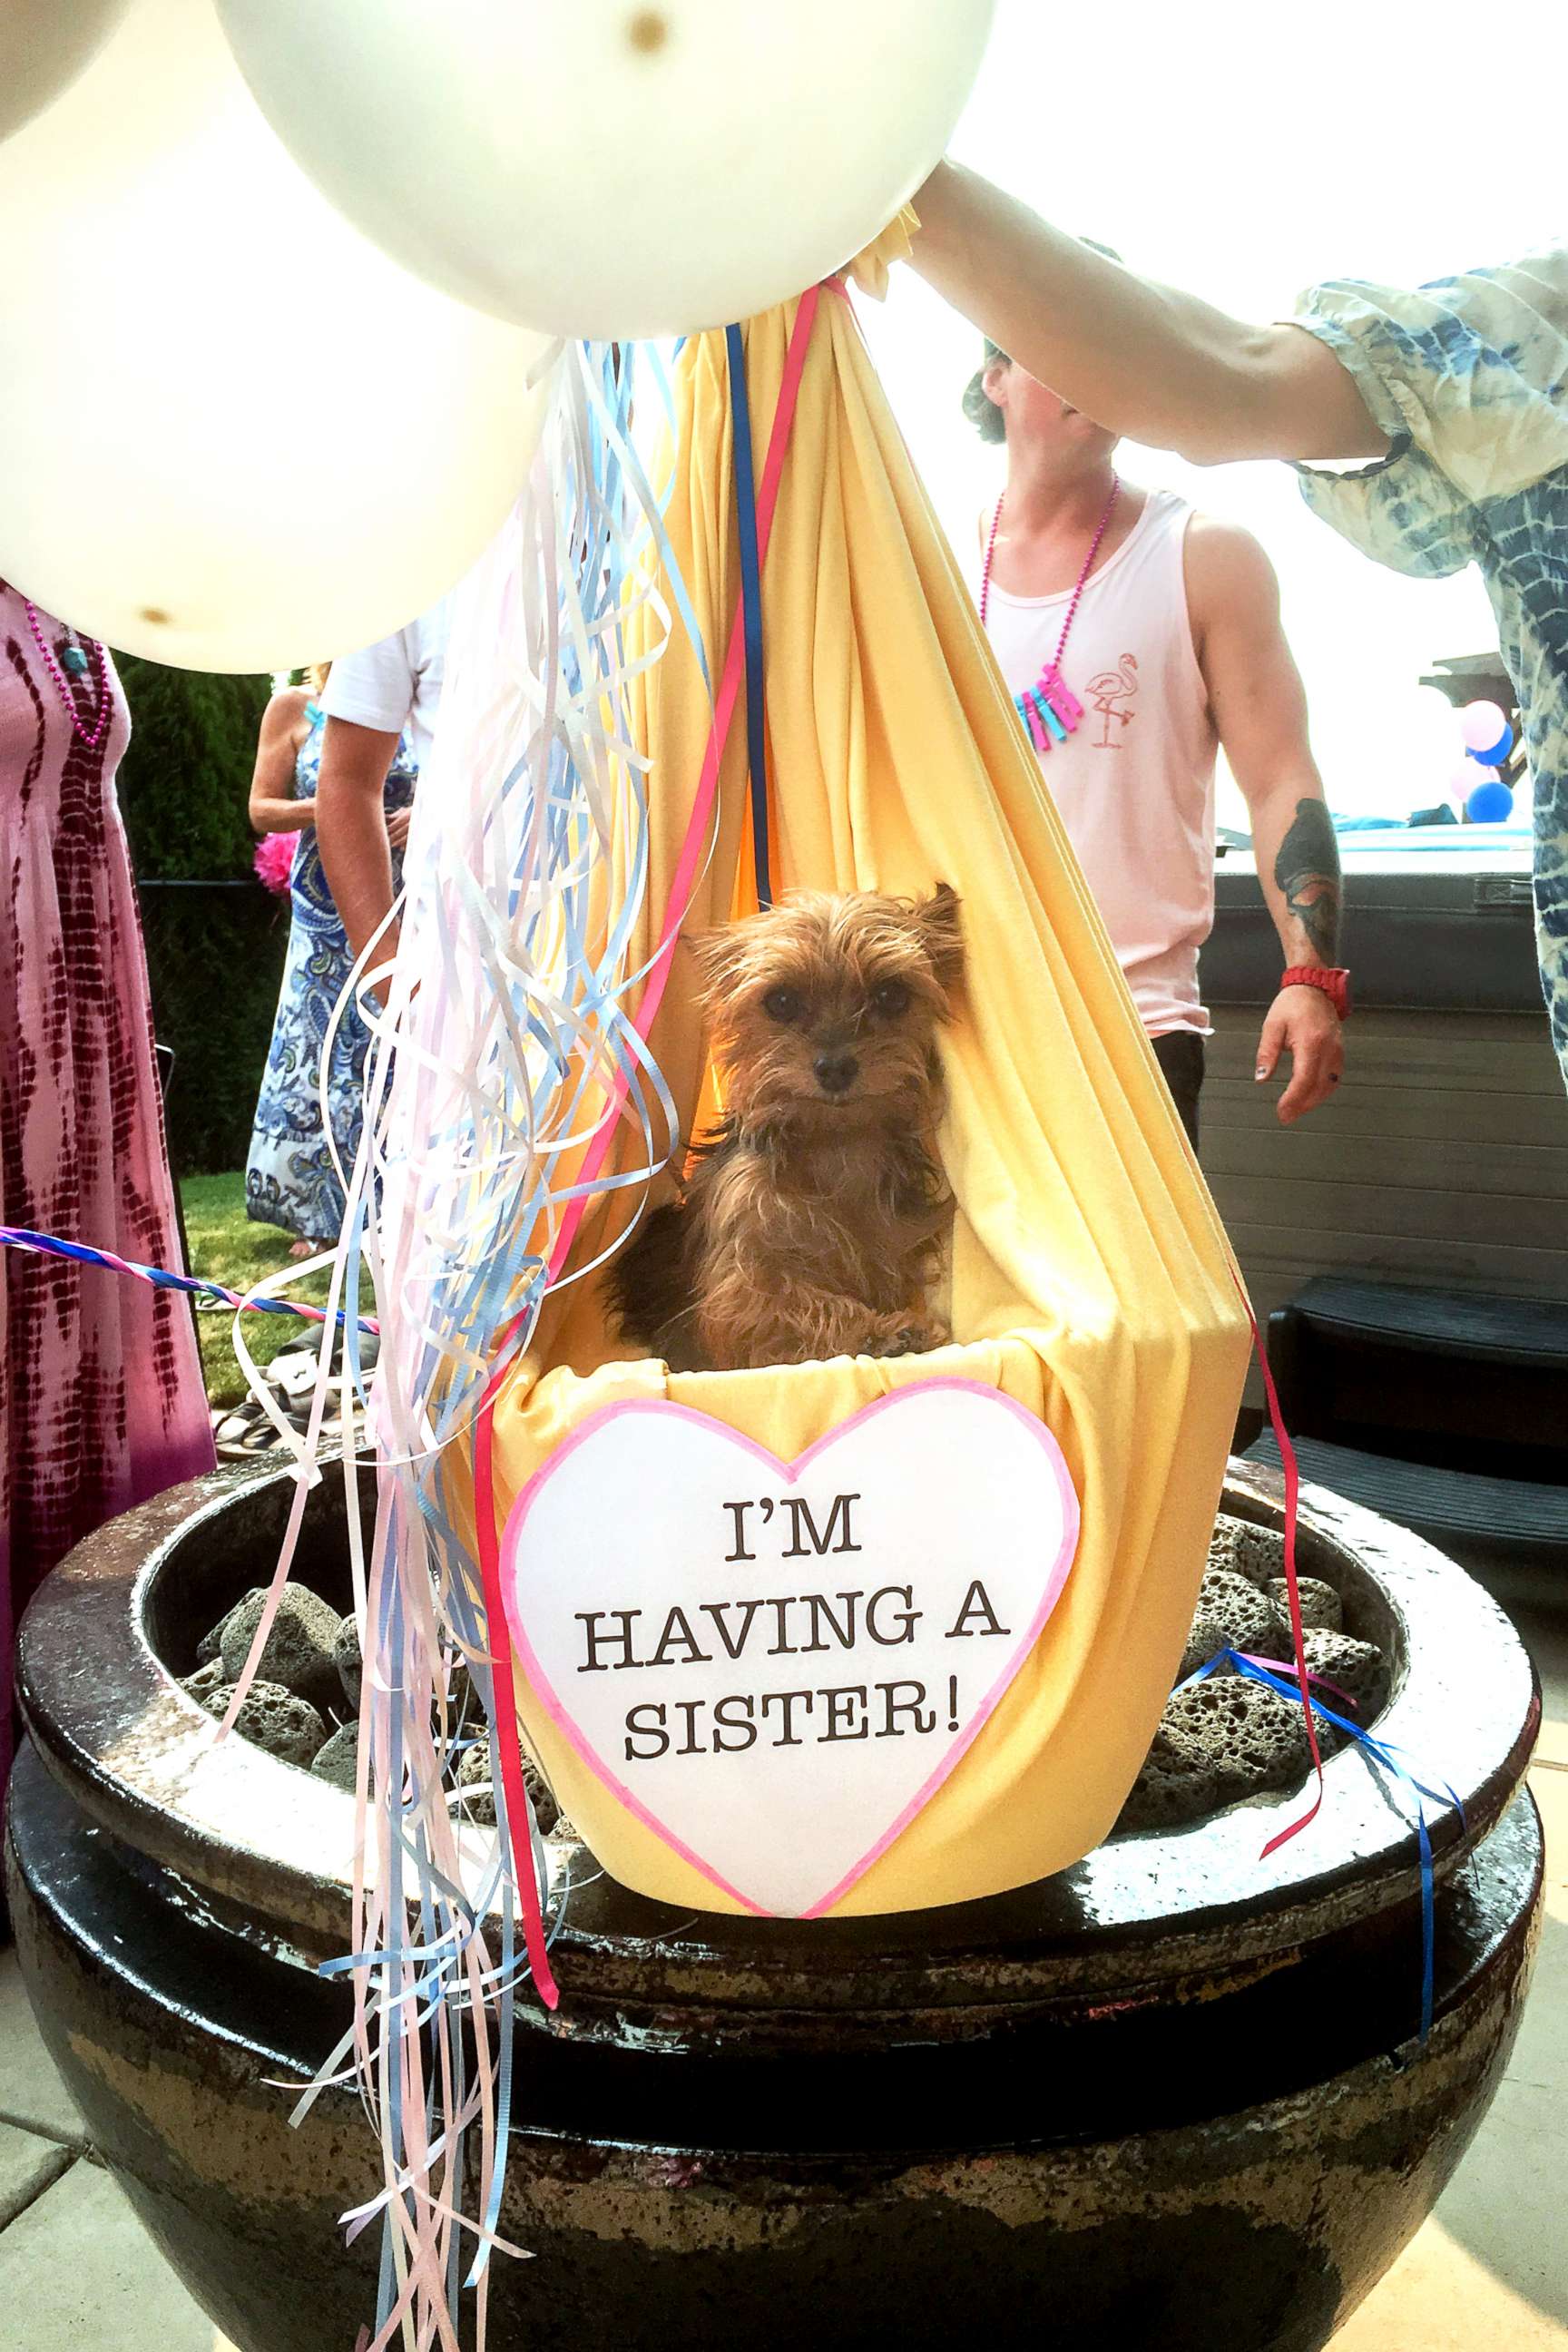 PHOTO: Brooke and Jordan's dog, Coco, appears in a basket tied to 75 balloons.